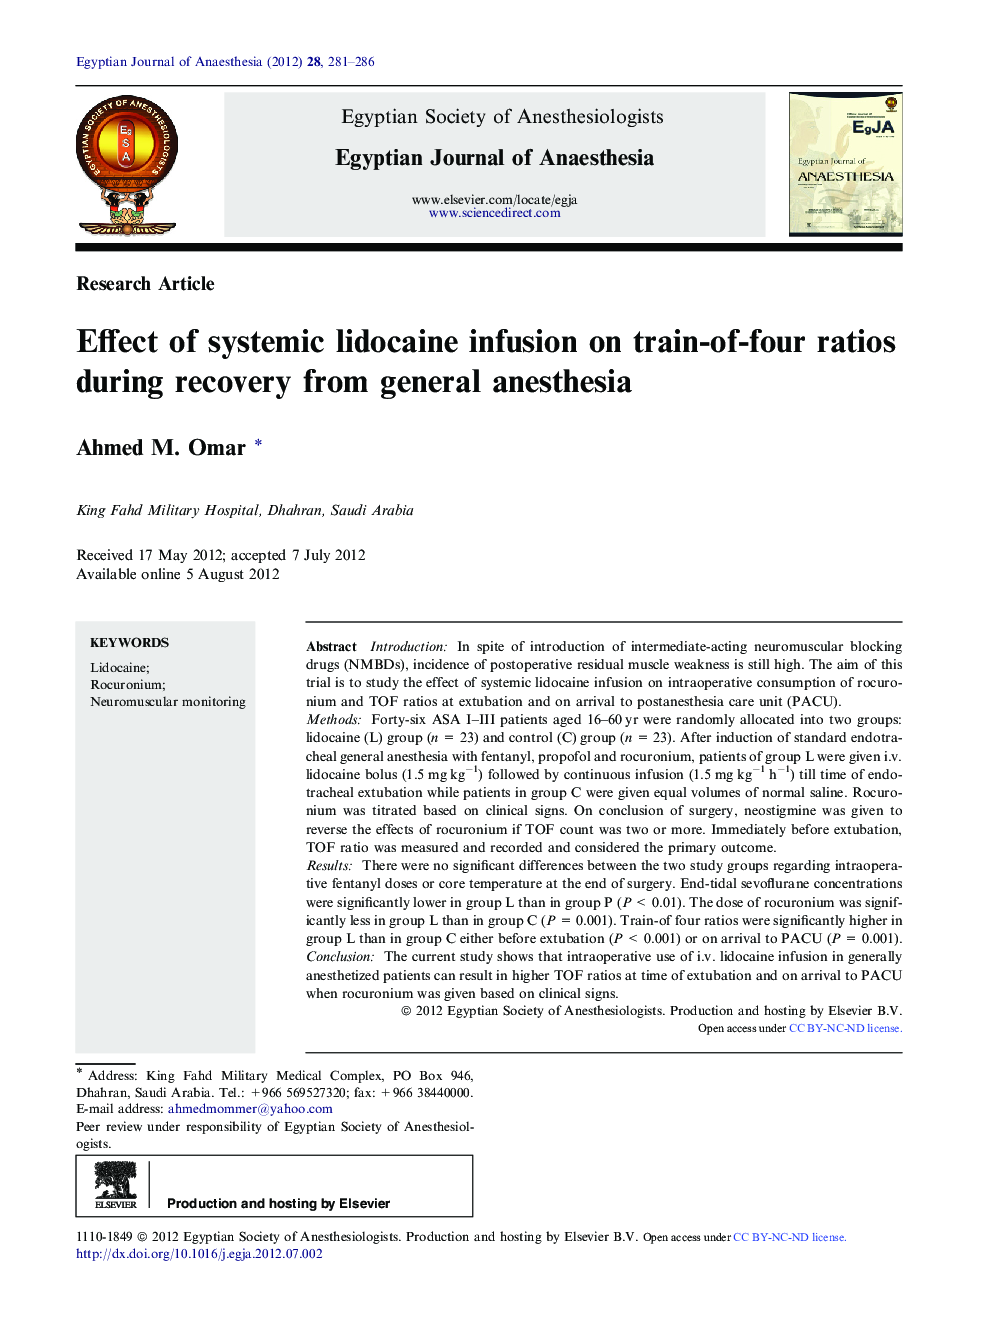 Effect of systemic lidocaine infusion on train-of-four ratios during recovery from general anesthesia 